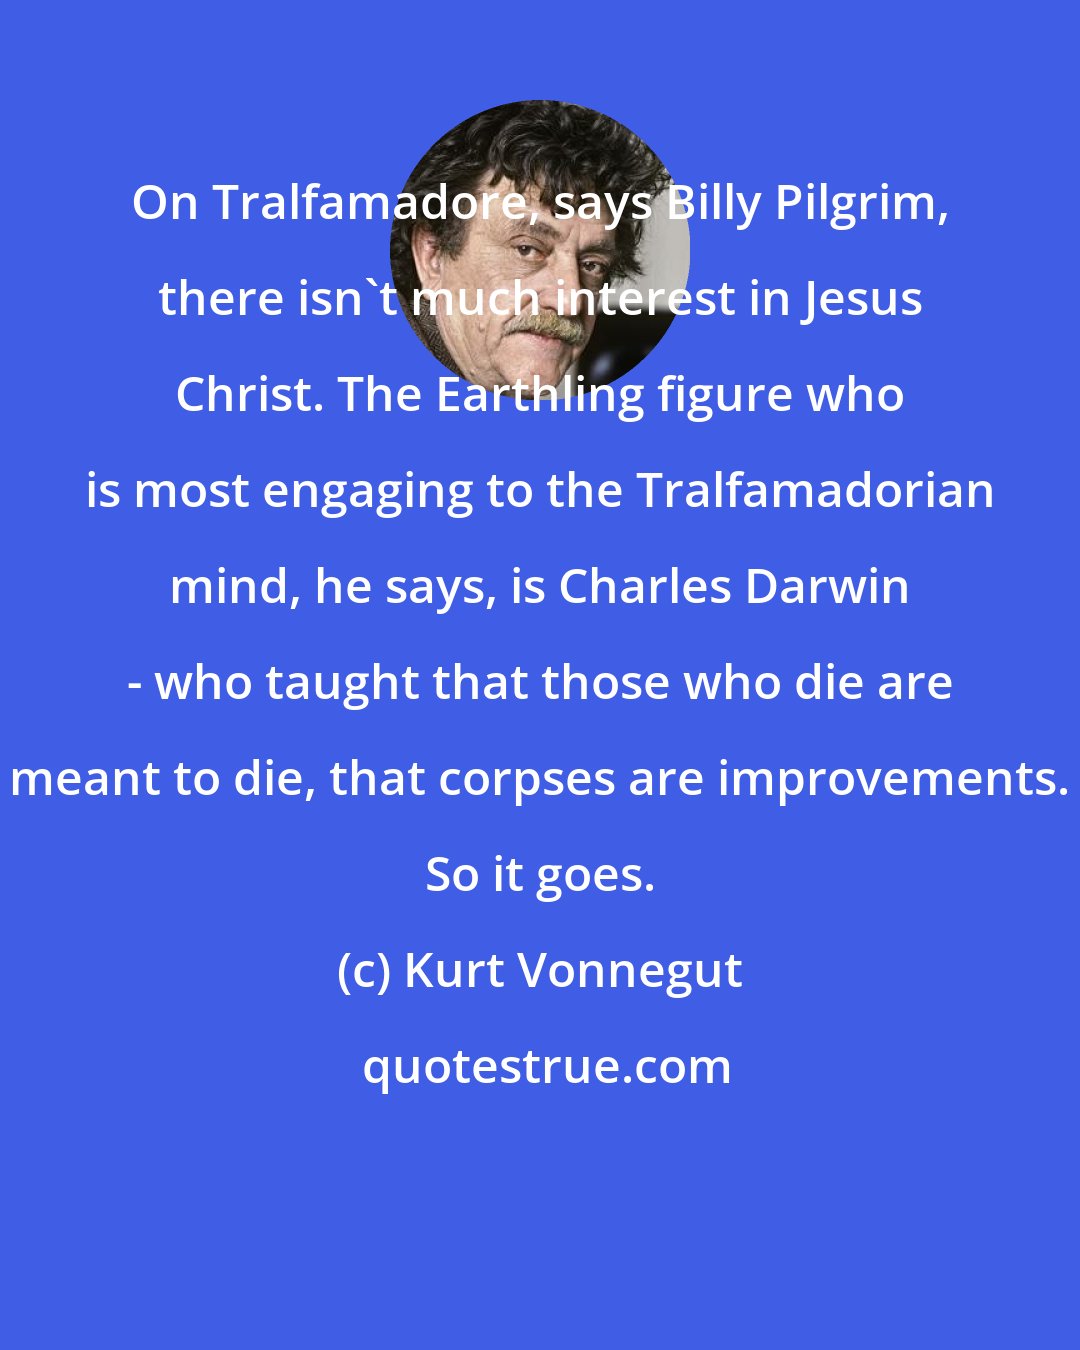 Kurt Vonnegut: On Tralfamadore, says Billy Pilgrim, there isn't much interest in Jesus Christ. The Earthling figure who is most engaging to the Tralfamadorian mind, he says, is Charles Darwin - who taught that those who die are meant to die, that corpses are improvements. So it goes.